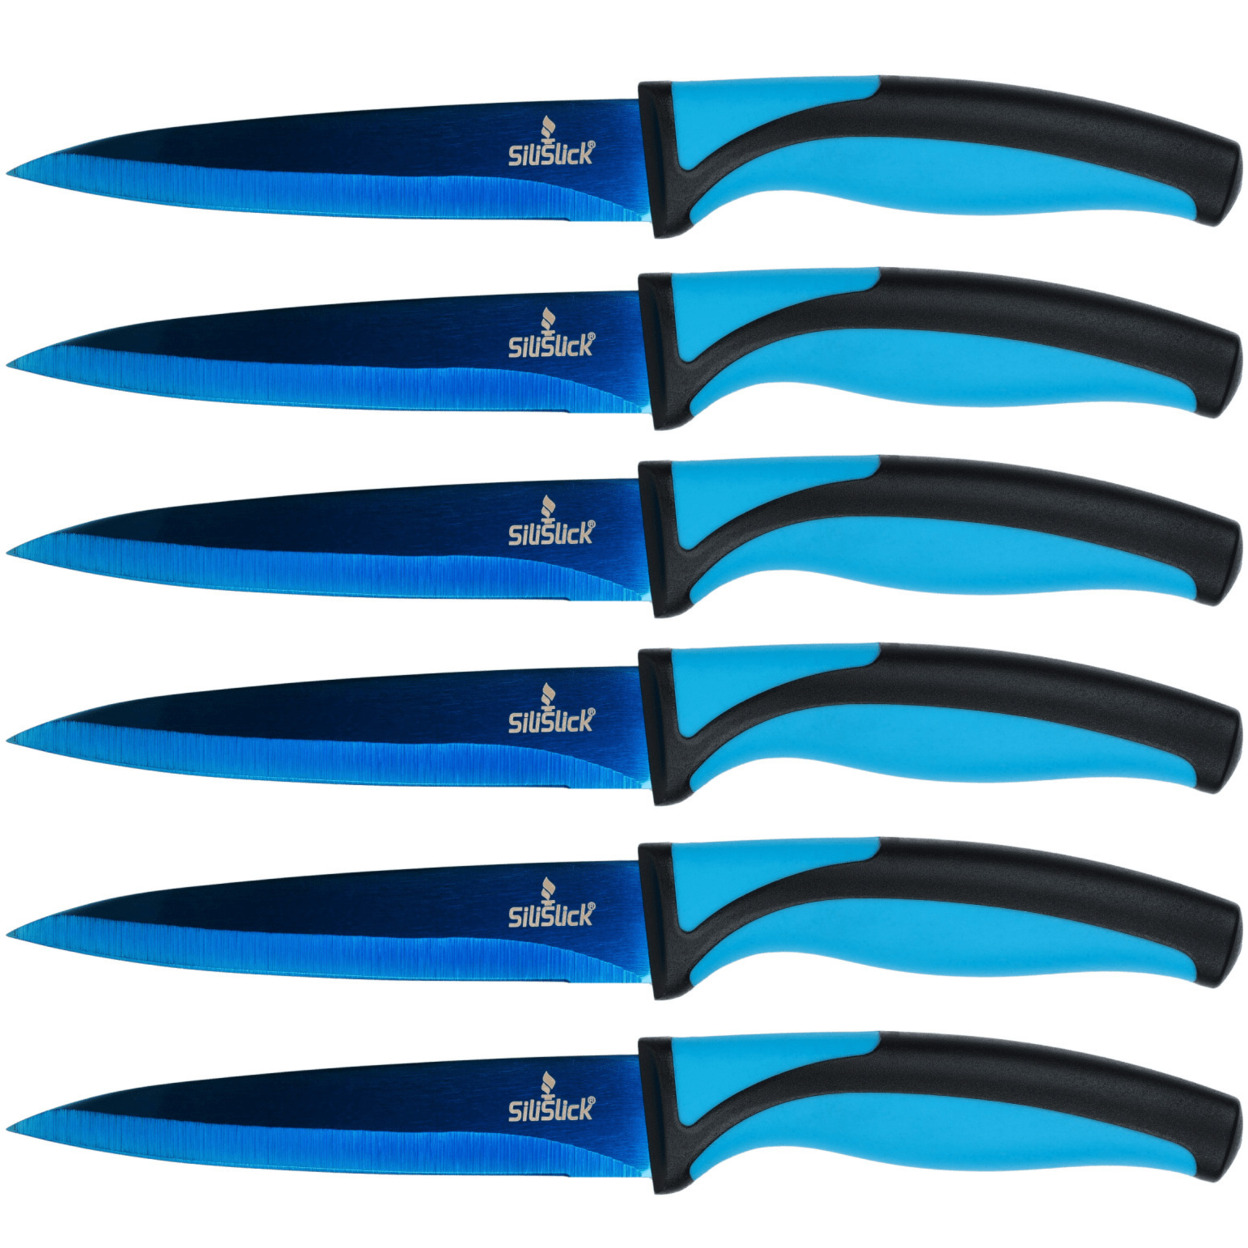 SiliSlick Stainless Steel Steak Knife Set Of 6 -Blue Handle And Blue Blade - Titanium Coated With Straight Edge For Cutting Meat